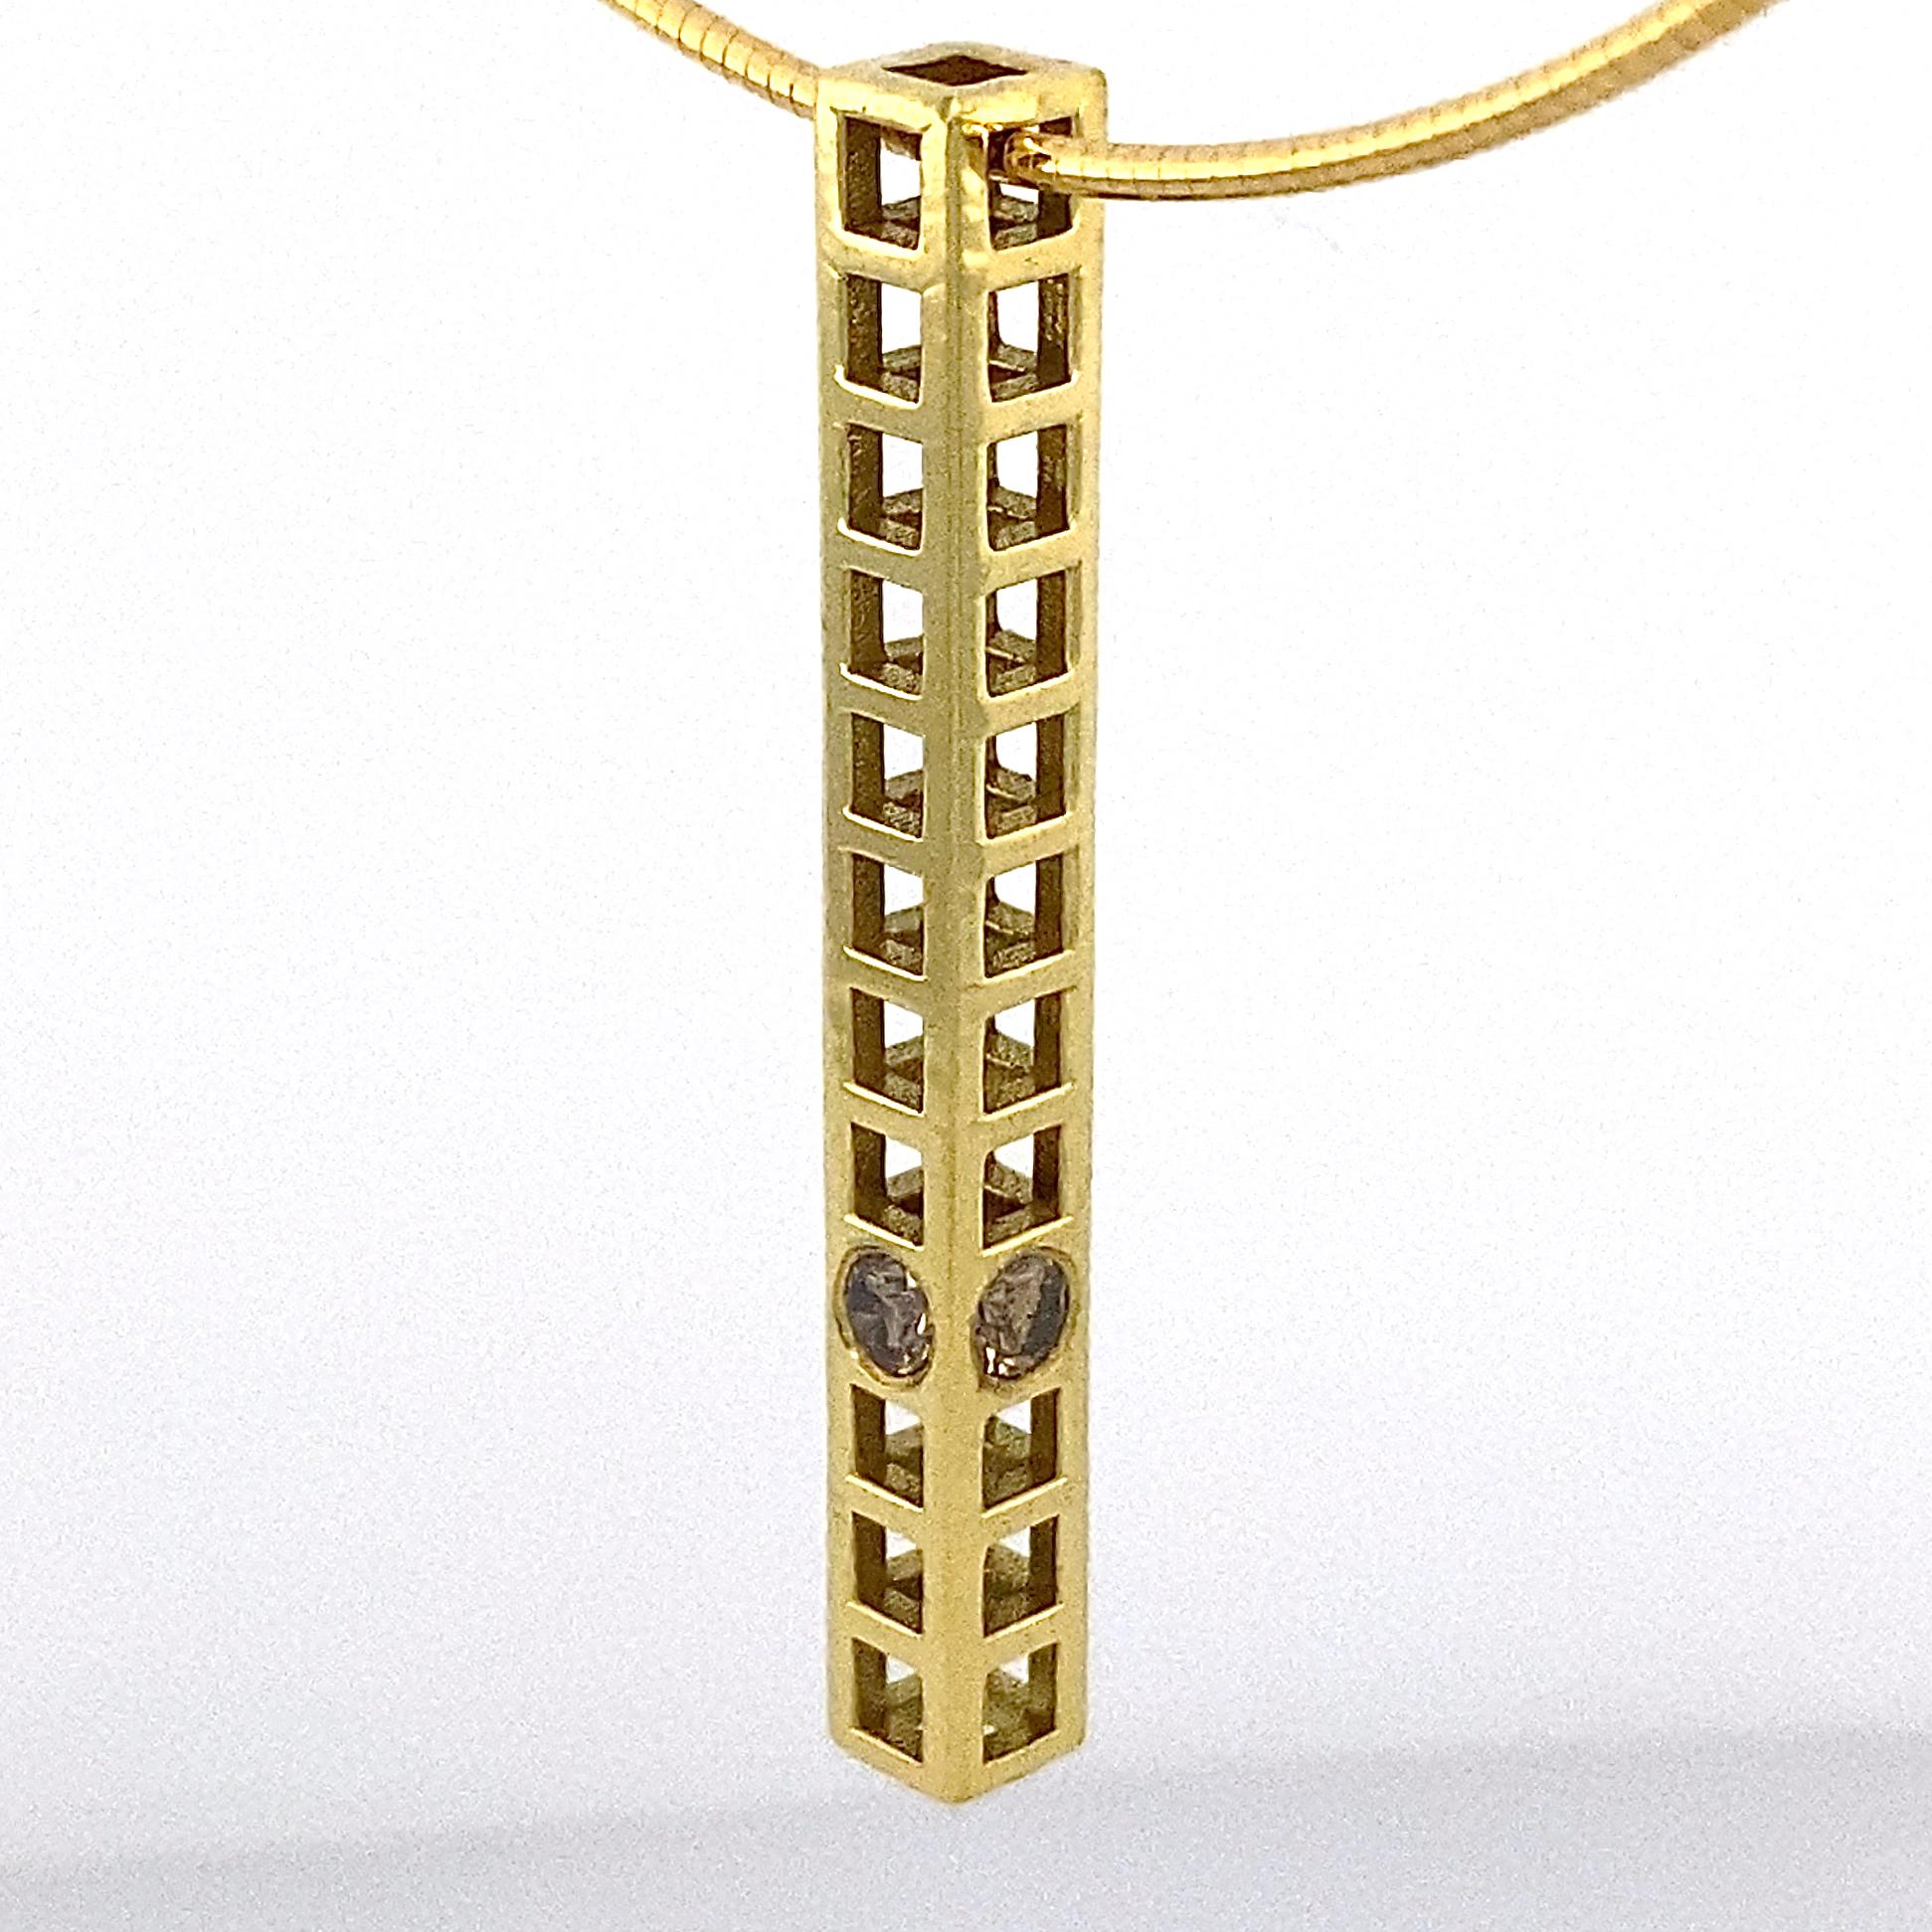 This is a one-of-a-kind necklace by Eytan Brandes featuring a modern, architectural pendant in polished 18 karat yellow gold.  Four light brown, full-cut diamonds are set at the same position on each side.  

The 14 karat gold choker-length round